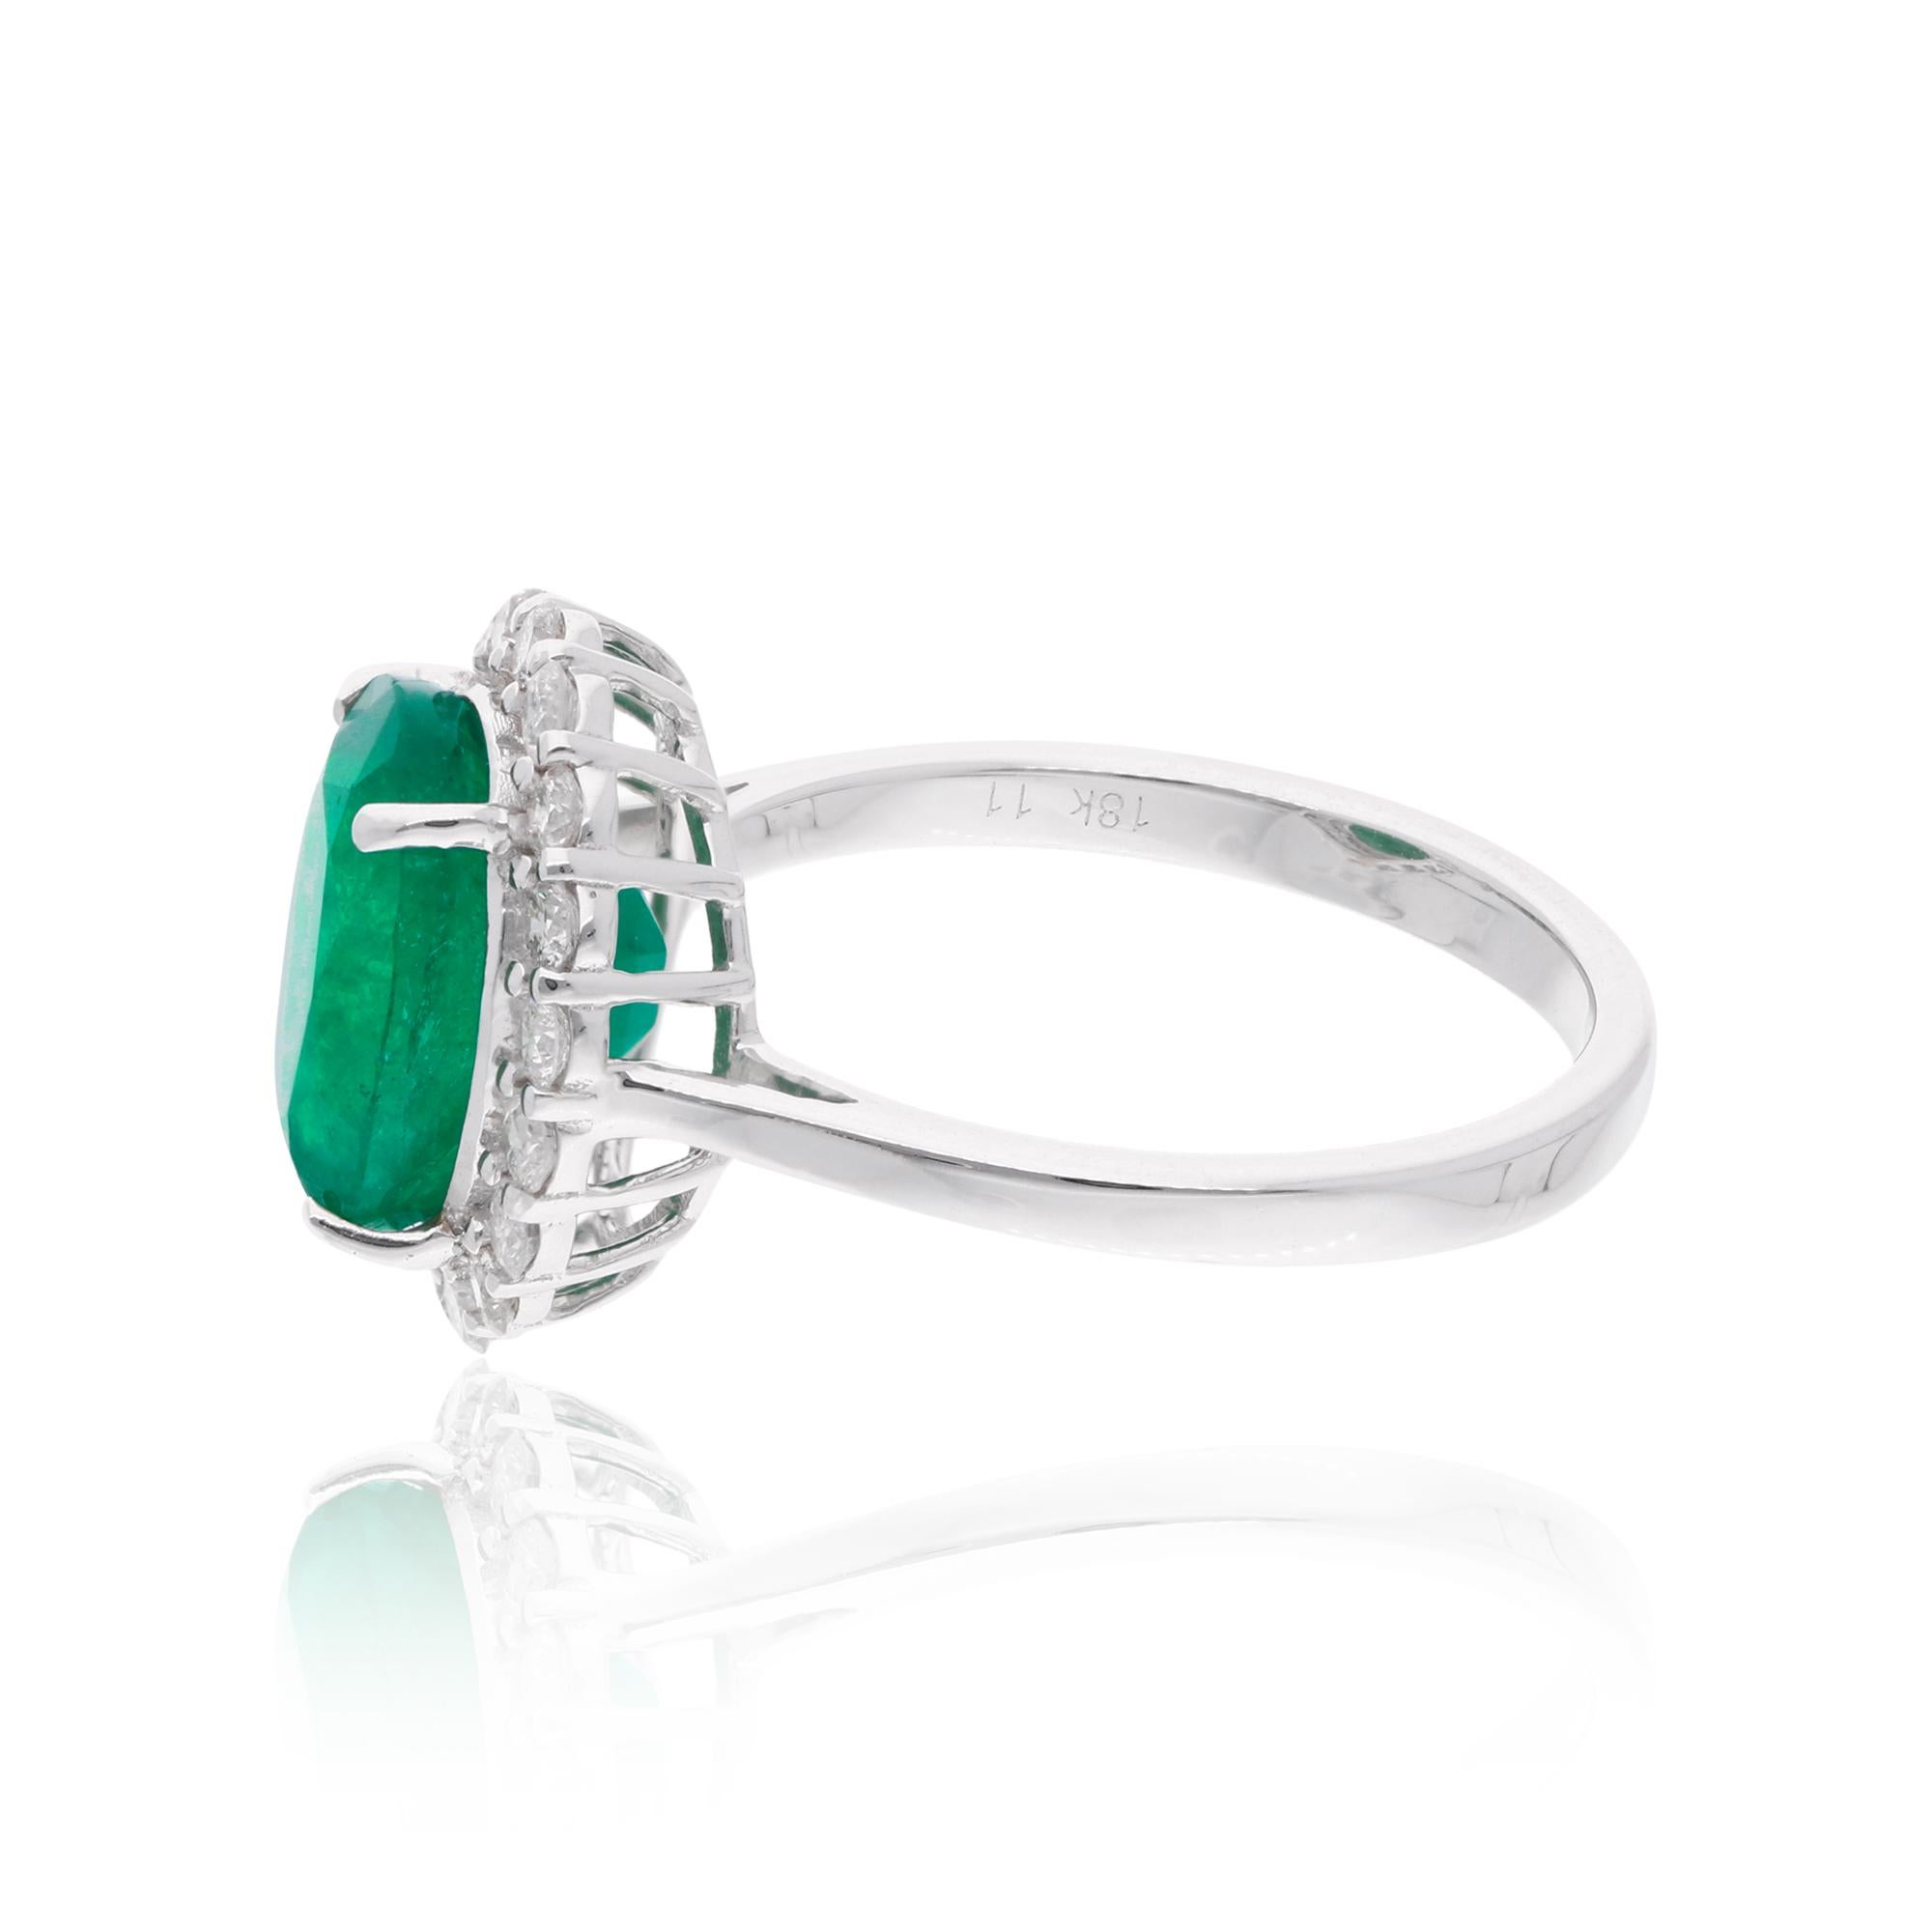 Item Code :- SER-22611 (14k)
Gross Wt. :- 3.70 gm
14k Solid White Gold Wt. :- 2.82 gm
Natural Diamond Wt. :- 0.50 Ct. ( AVERAGE DIAMOND CLARITY SI1-SI2 & COLOR H-I )
Emerald Wt. :- 3.95 Ct. 
Ring Size :- 7 US & All size available

✦